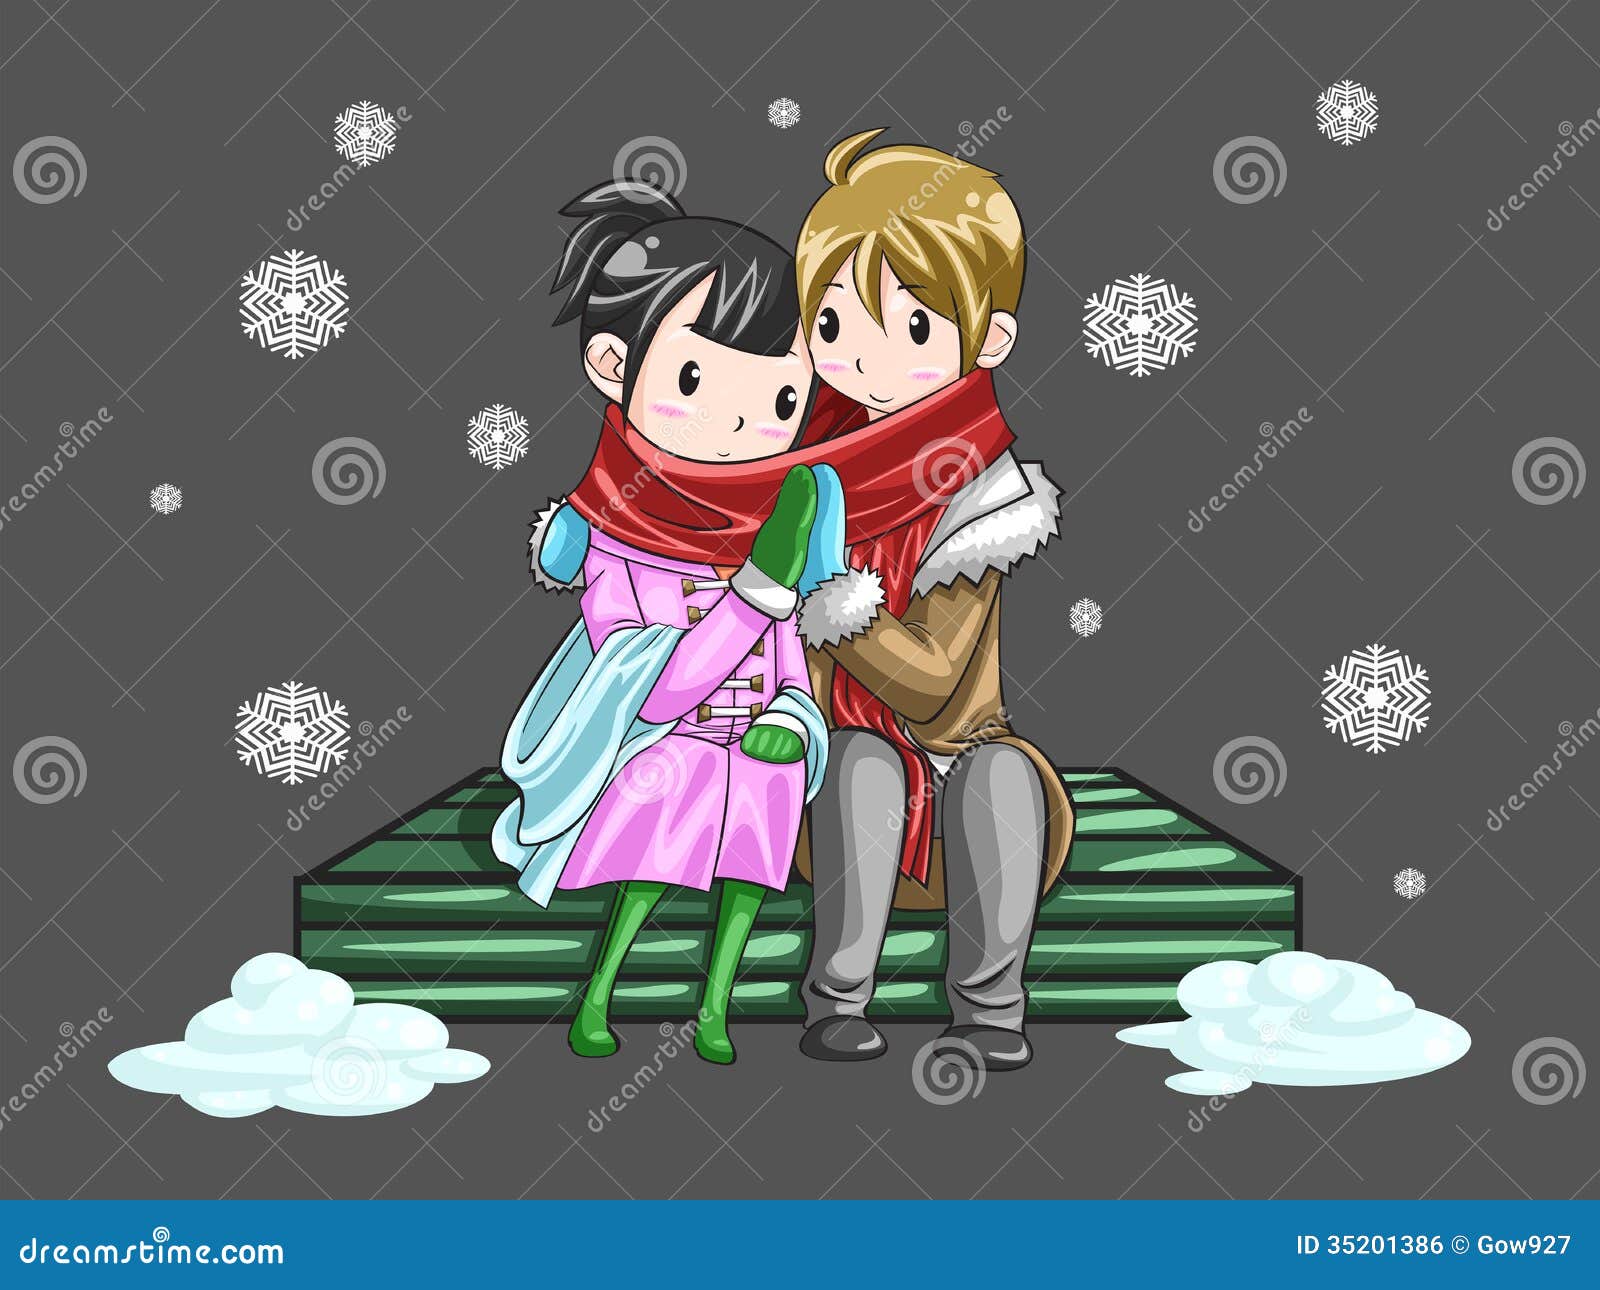 cute couple sharing their warmth in romantic winte